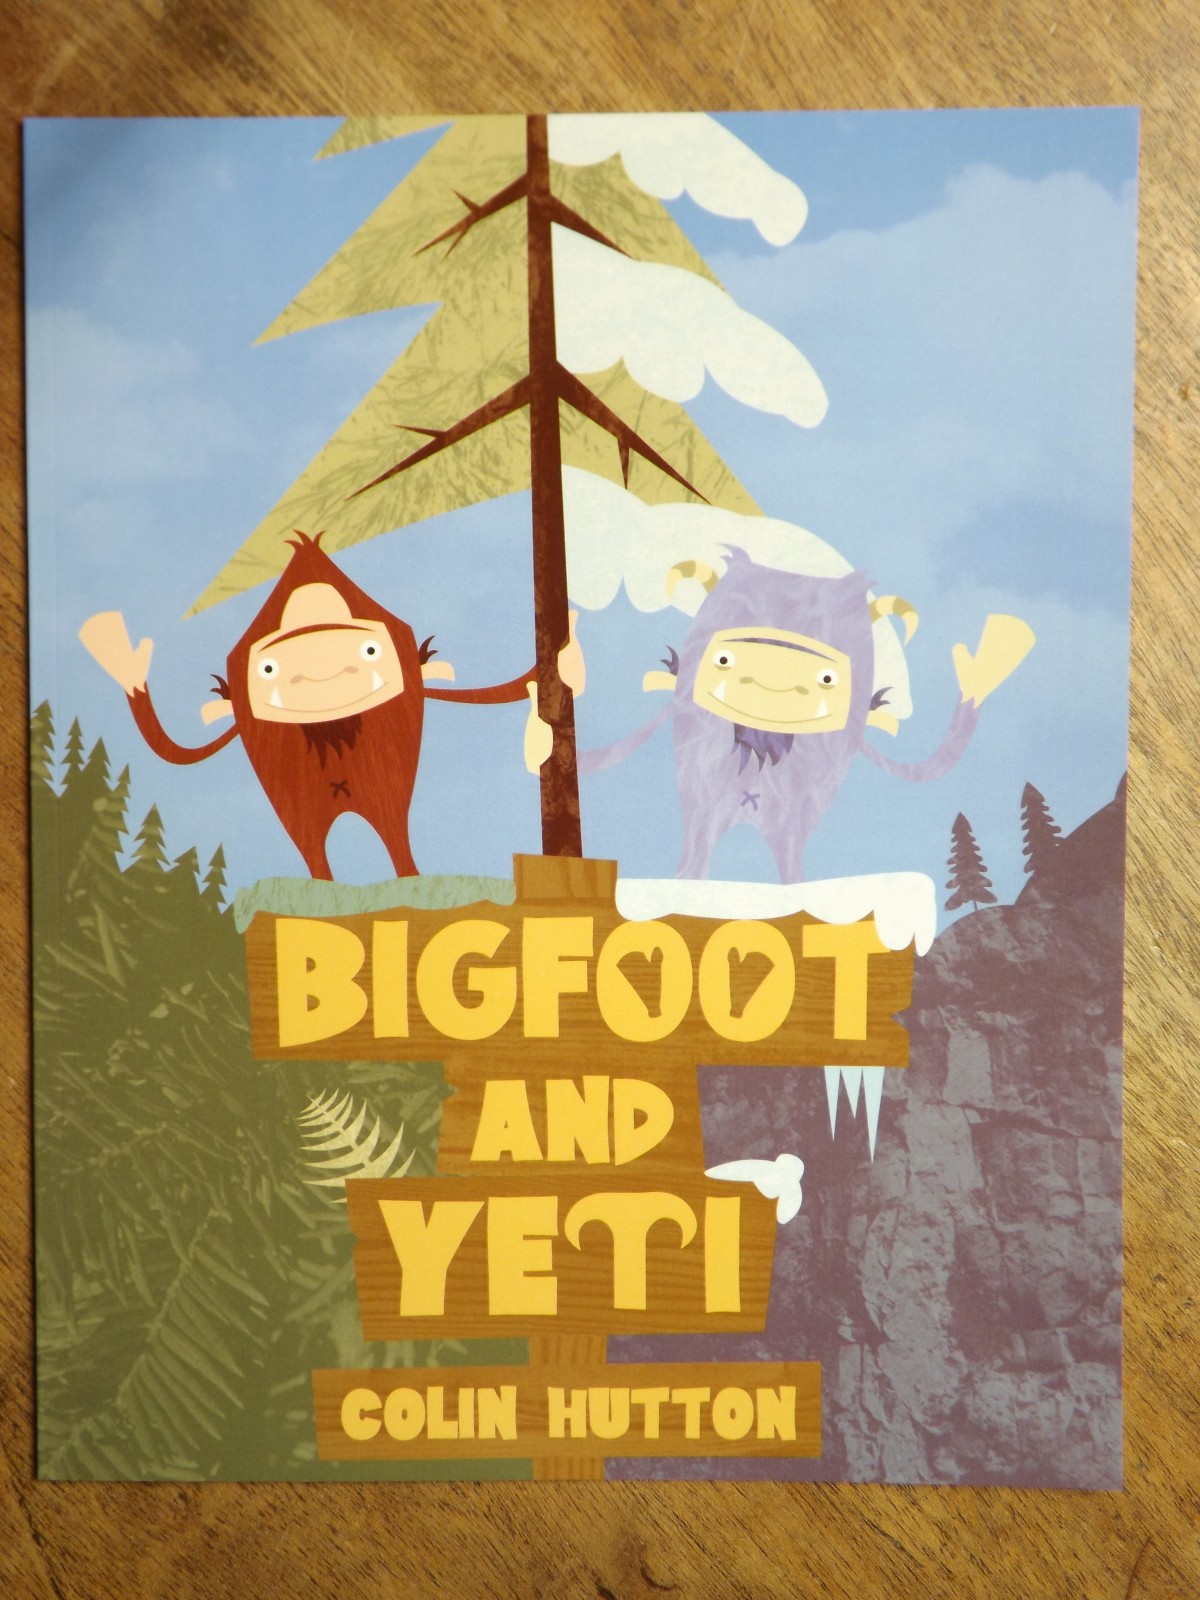 Book Feature: Bigfoot and Yeti